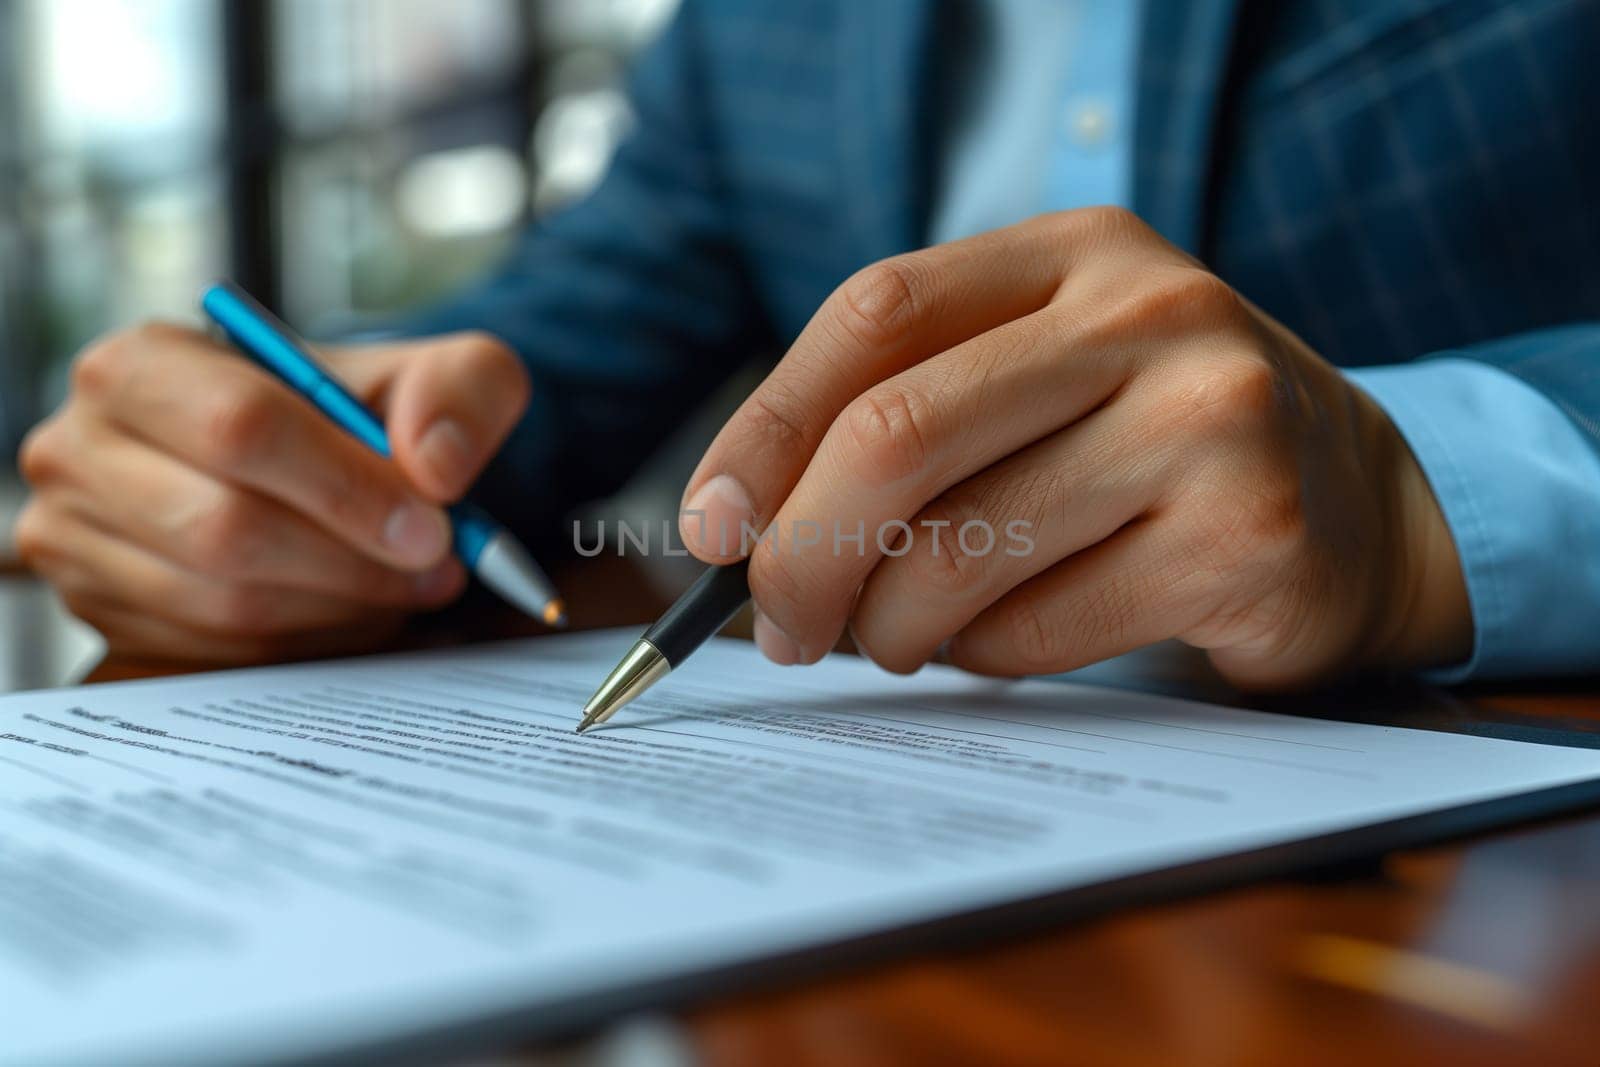 The person is using a pen to write on a piece of paper with their hand. Their thumb and fingers hold the pen firmly, producing neat handwriting in a stylish font